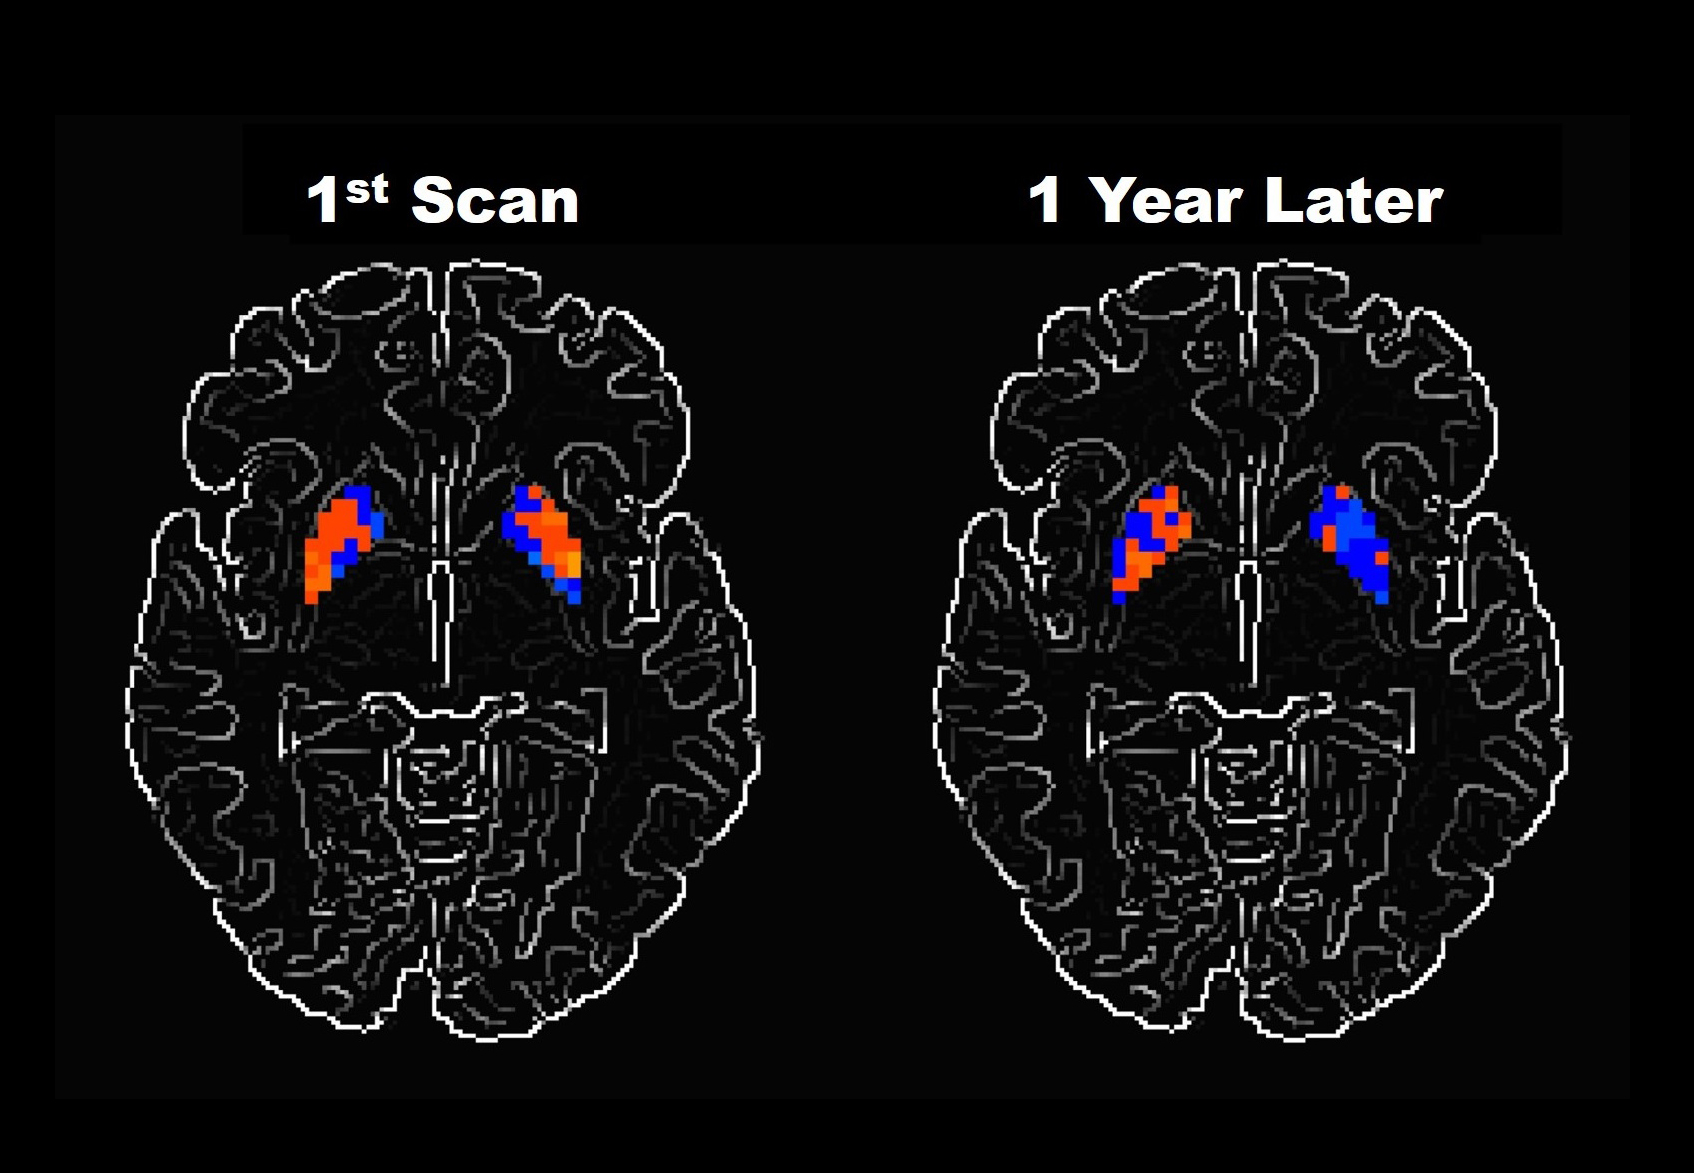 Brain scans taken a year apart show different levels of activity in certain areas.